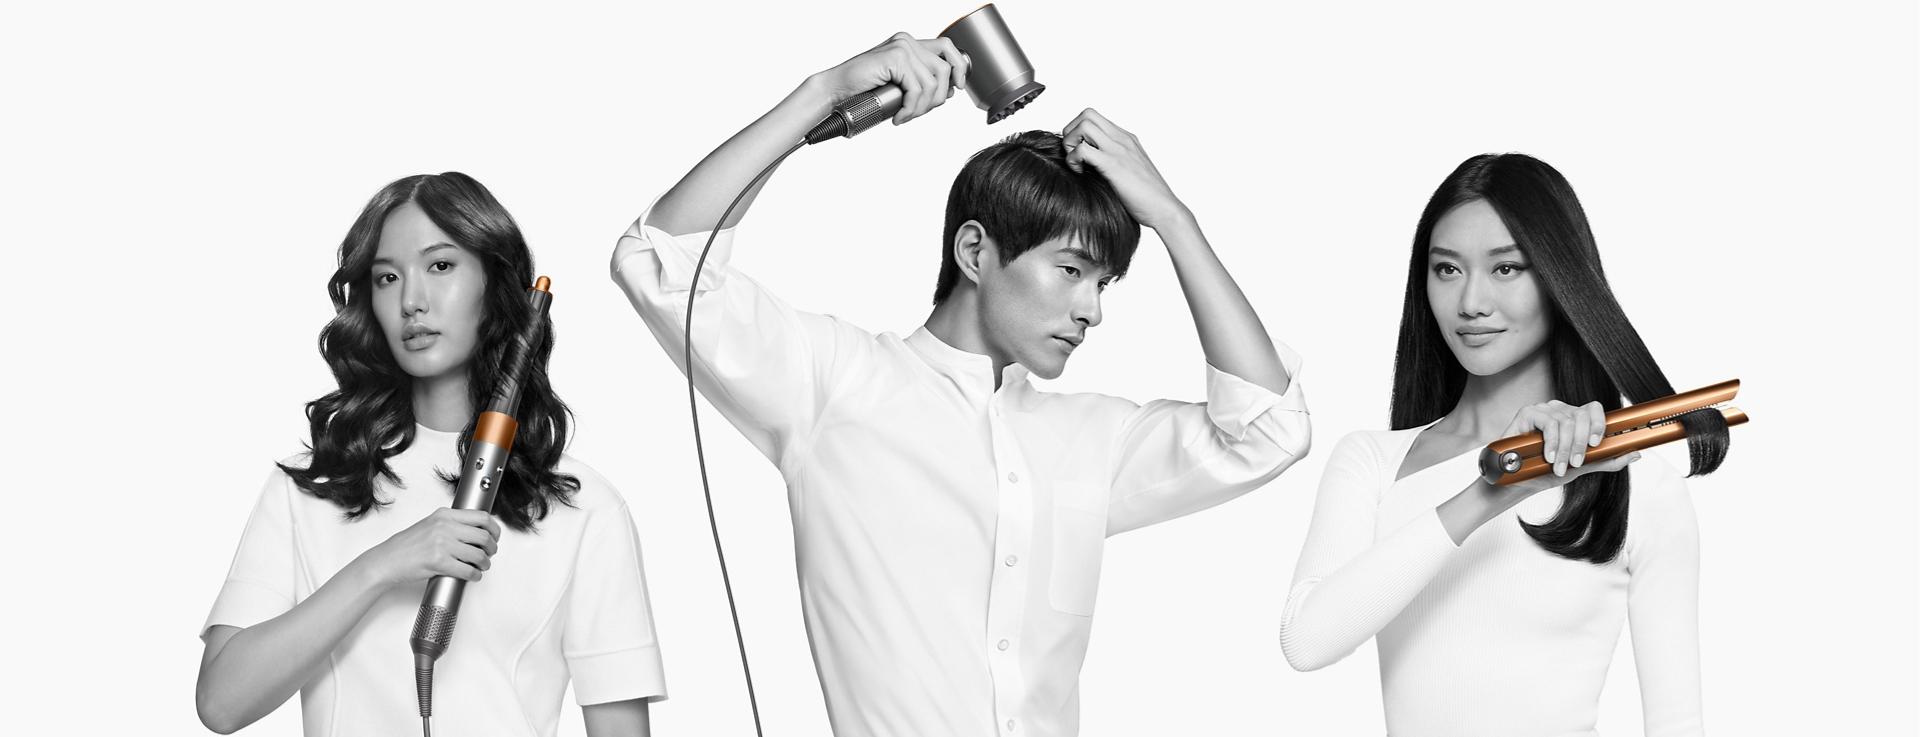 Models using the Dyson hair care range to dry or style their hair